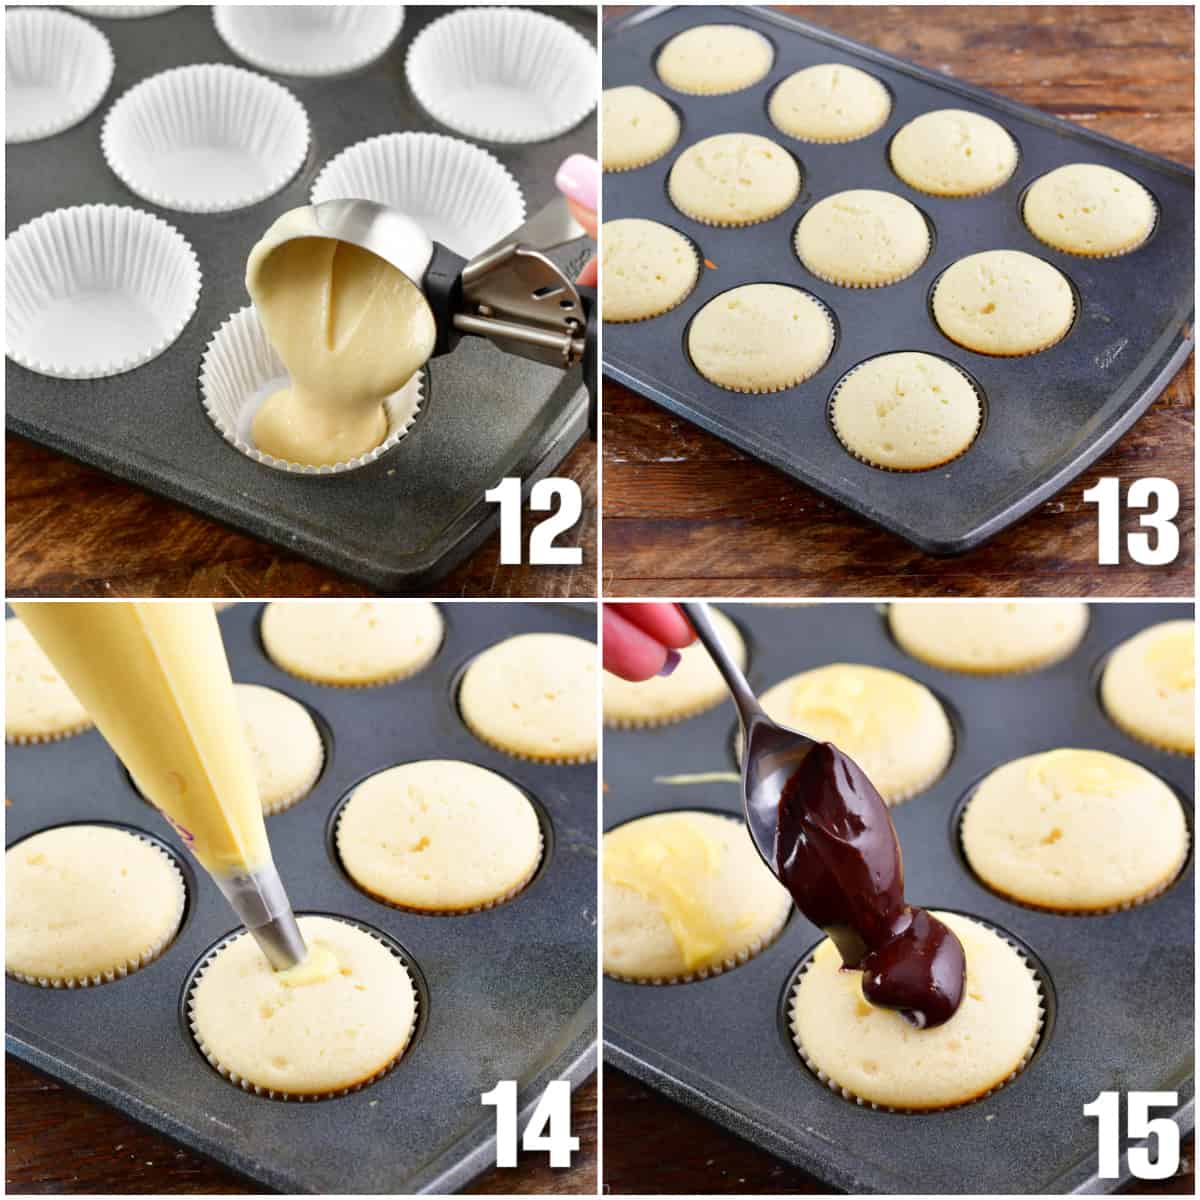 Collage of four images of pouring batter into cupcake tins, baking cupcakes, adding Boston cream into the cupcakes and then adding frosting to the top.